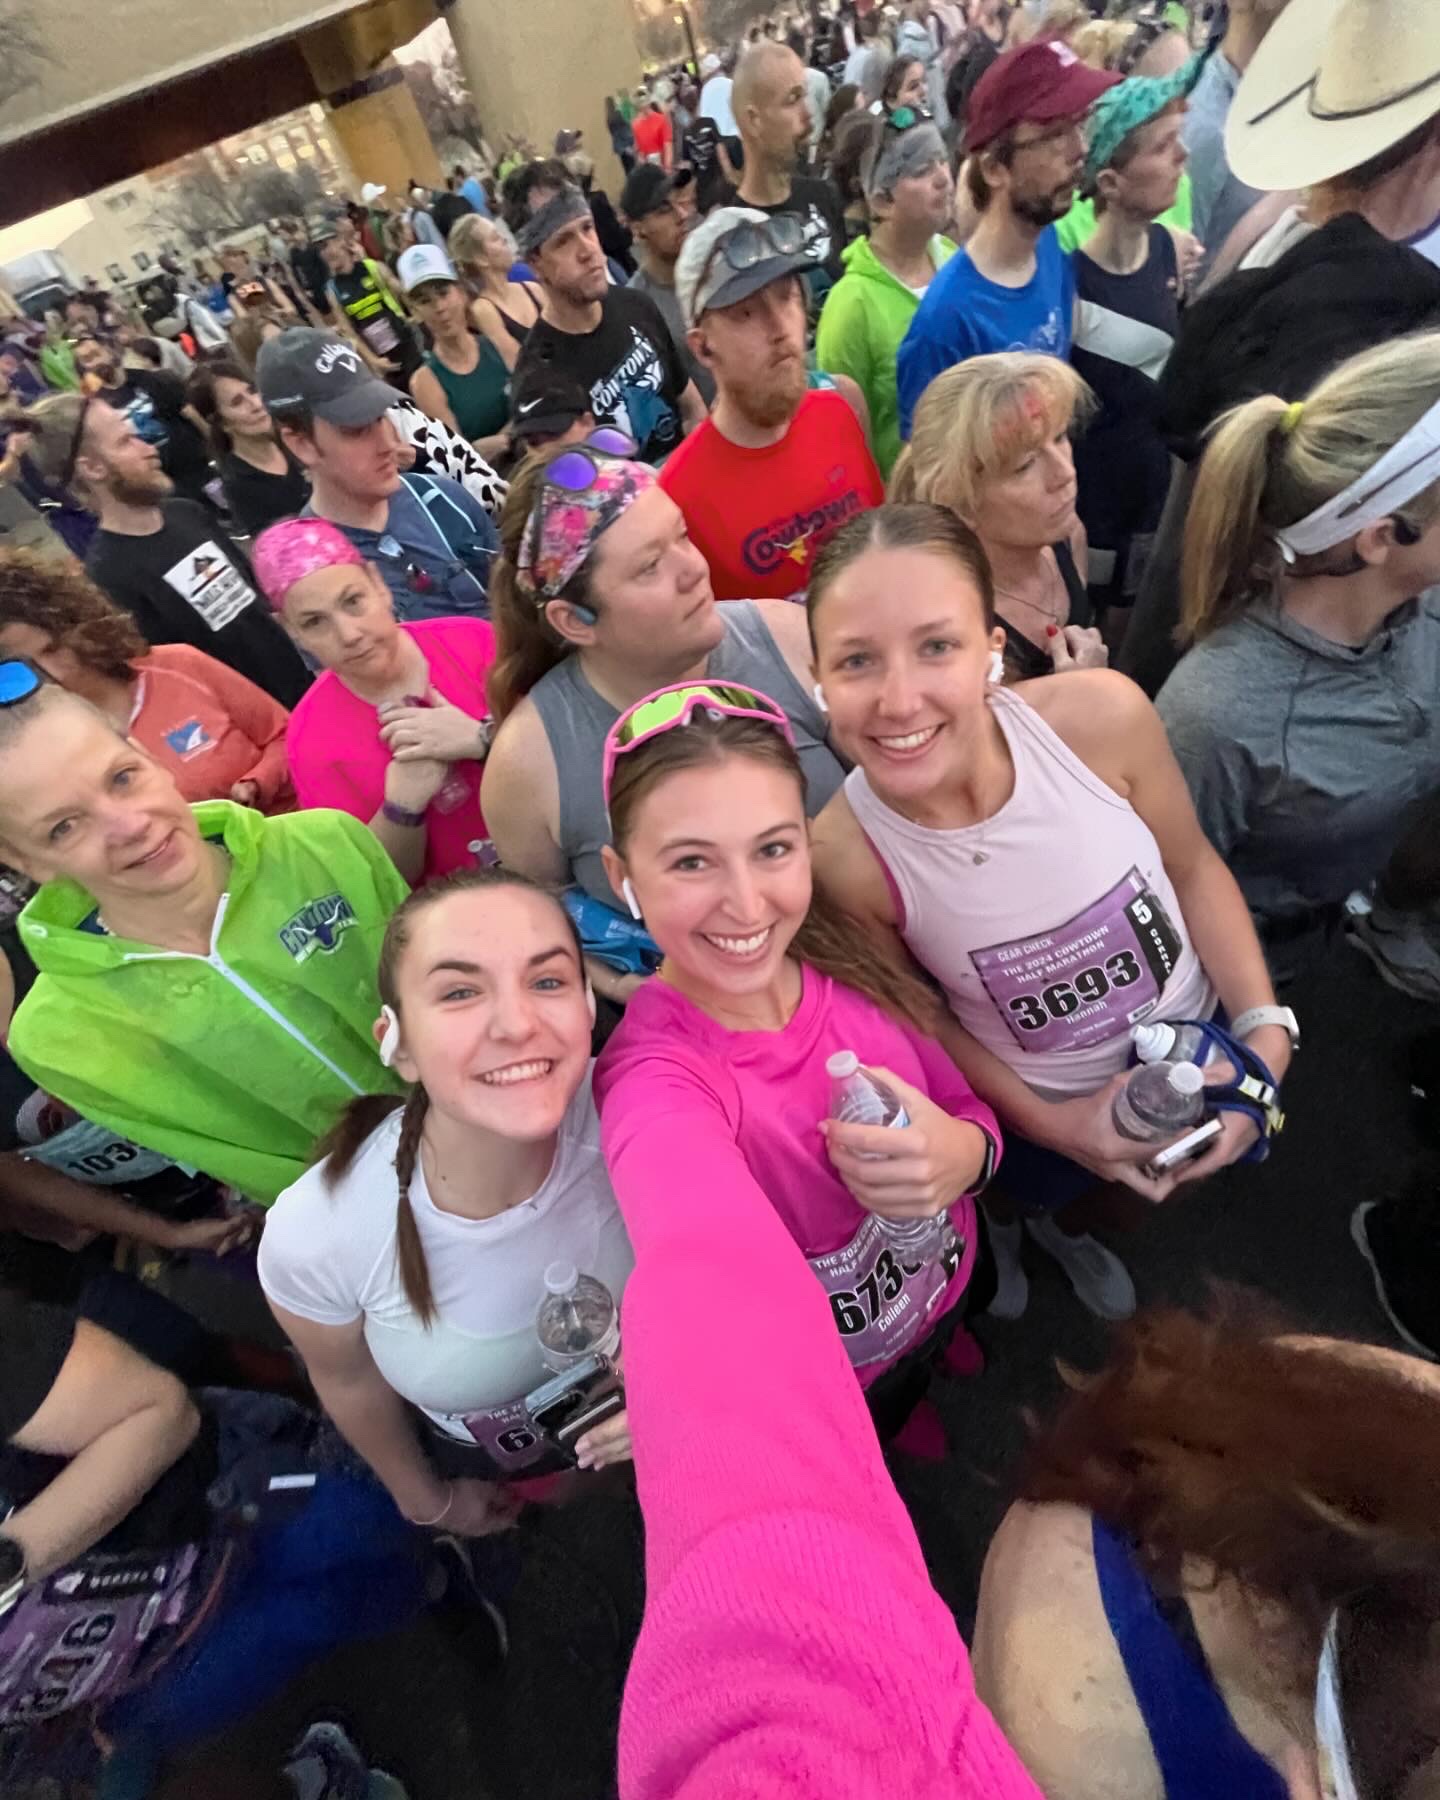 Colleen and other TCU students taking a selfie after running the Cowtown Marathon